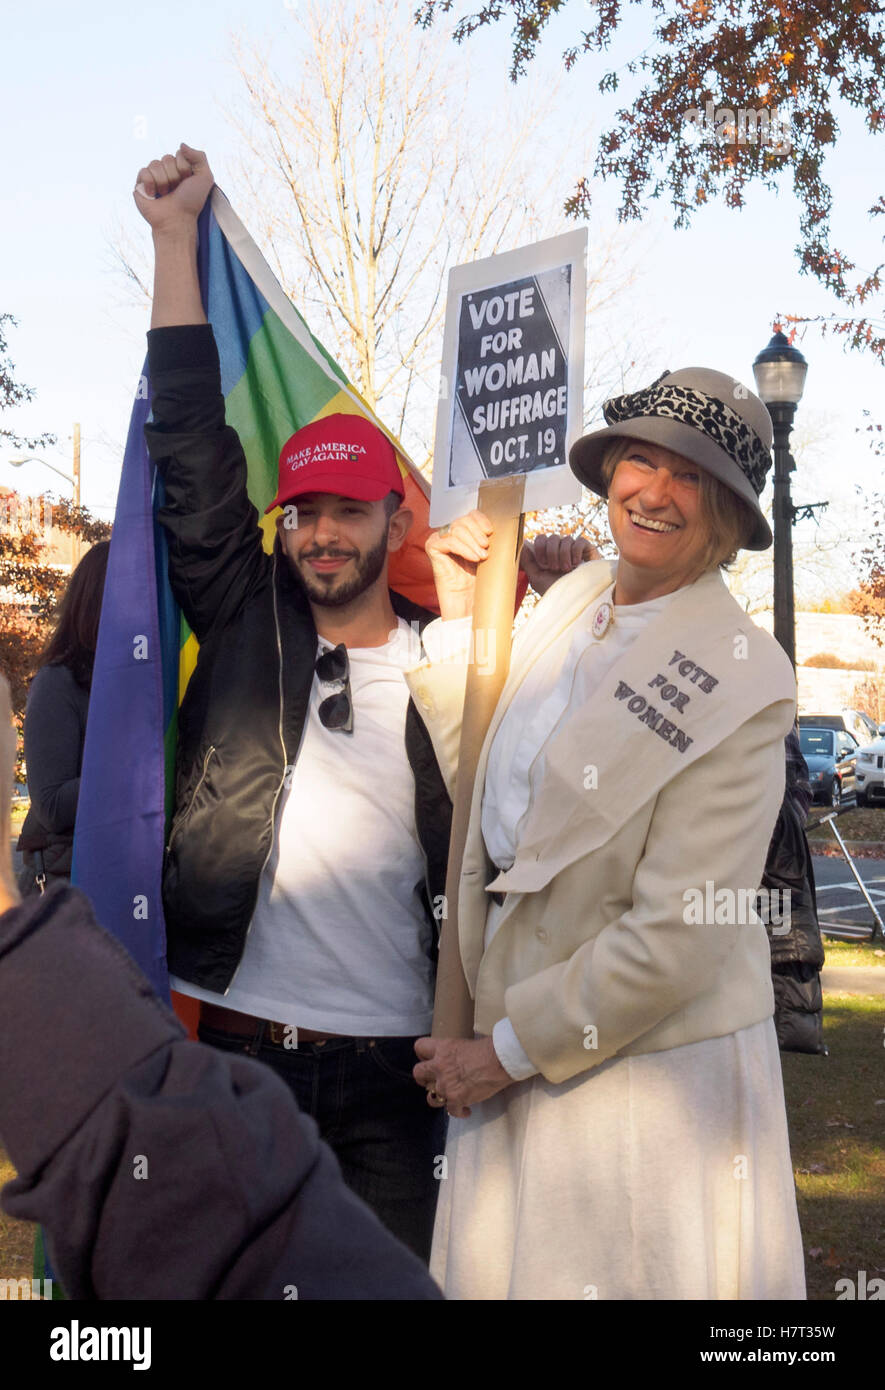 Chappaqua, NY, USA - 8 November 2016. Mary Refling of Chappaqua New York dressed as a suffragette in support of Hillary Clinton poses with J.D. Scarola of Somers, NY who holds a rainbow flag and wears a hat that says 'Make America Gay Again' after a Pantsuit Up flash mob at the Chappaqua Train Station on Election Day. Credit:  Marianne A. Campolongo/Alamy Live News Stock Photo